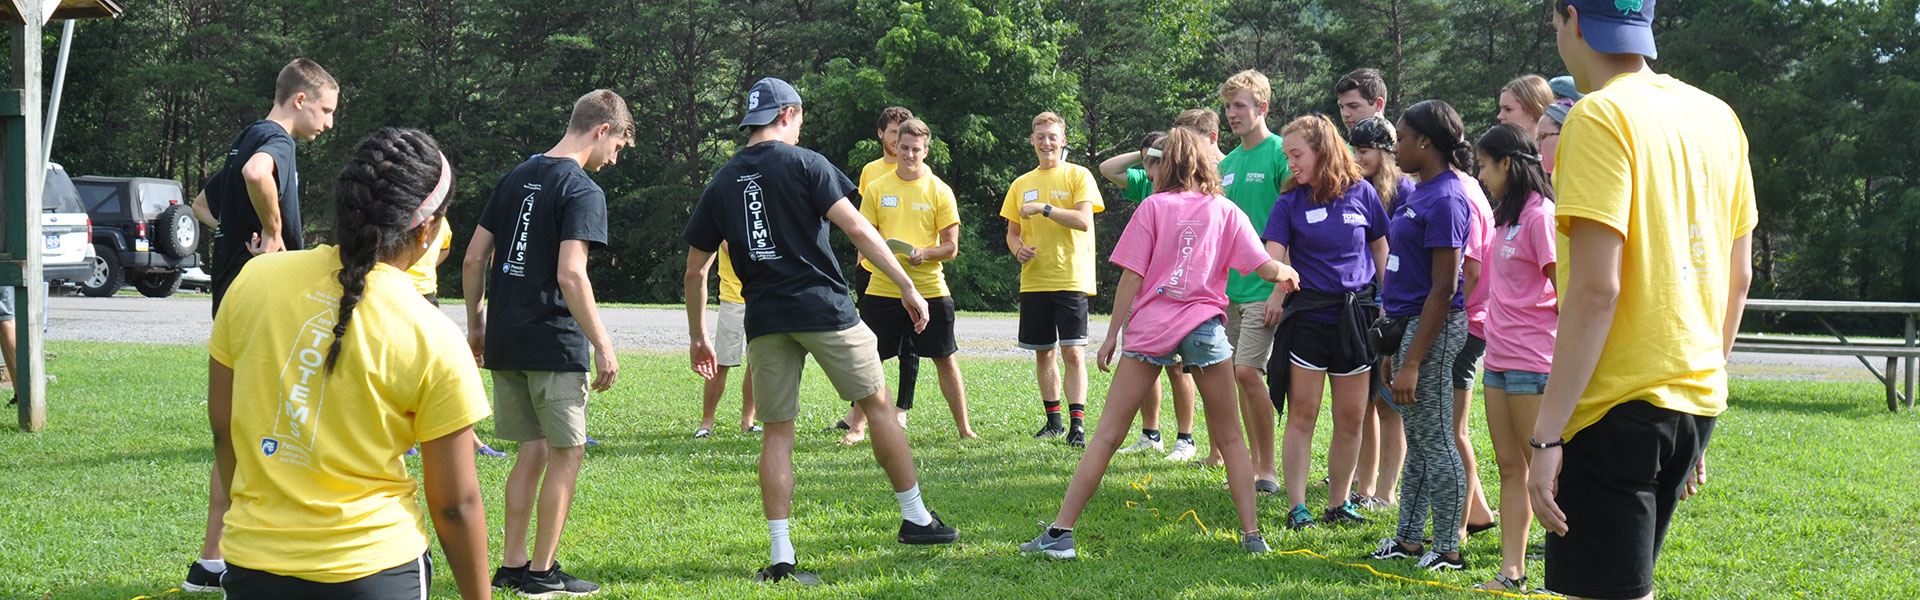 TEEMS participants in a field playing hackey sack